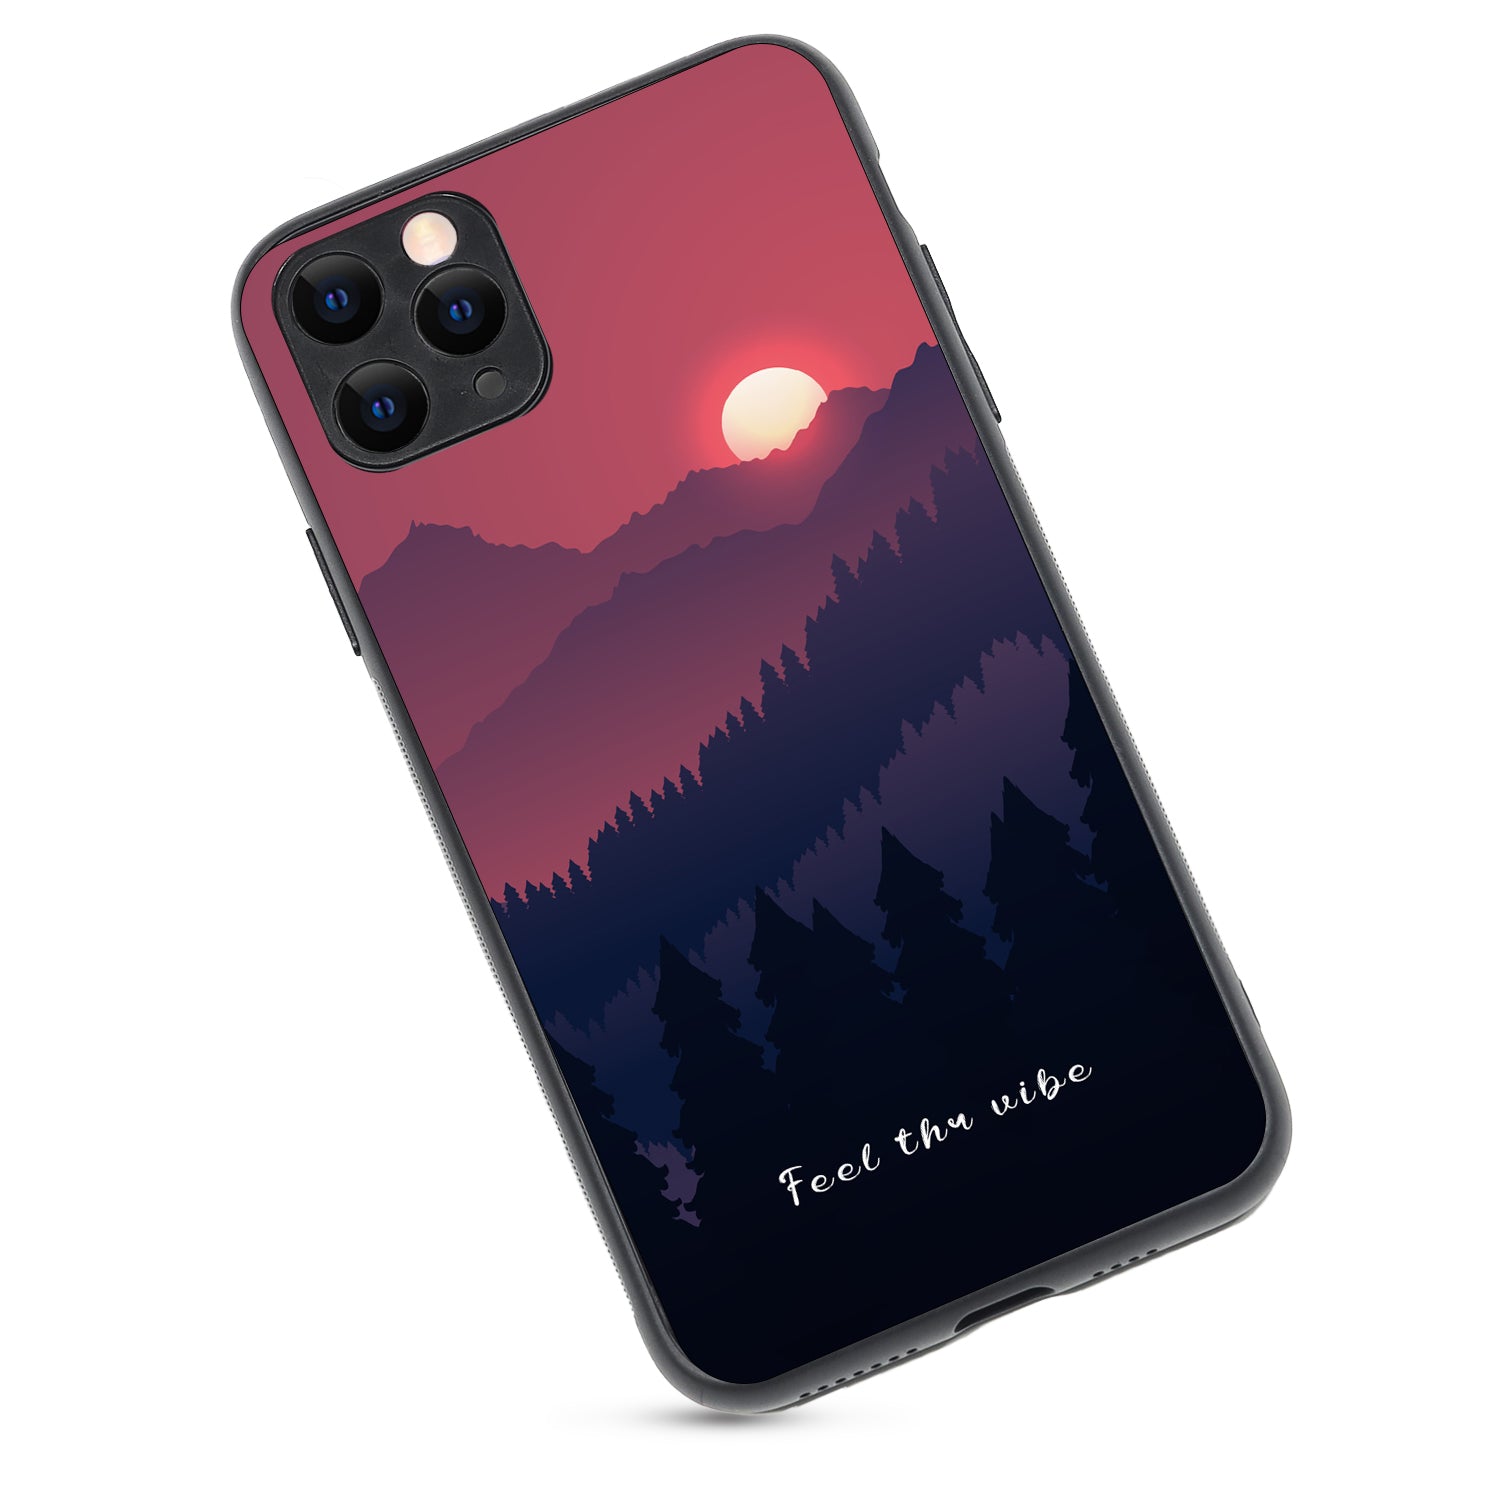 Feel The Vibes Fauna iPhone 11 Pro Max Case